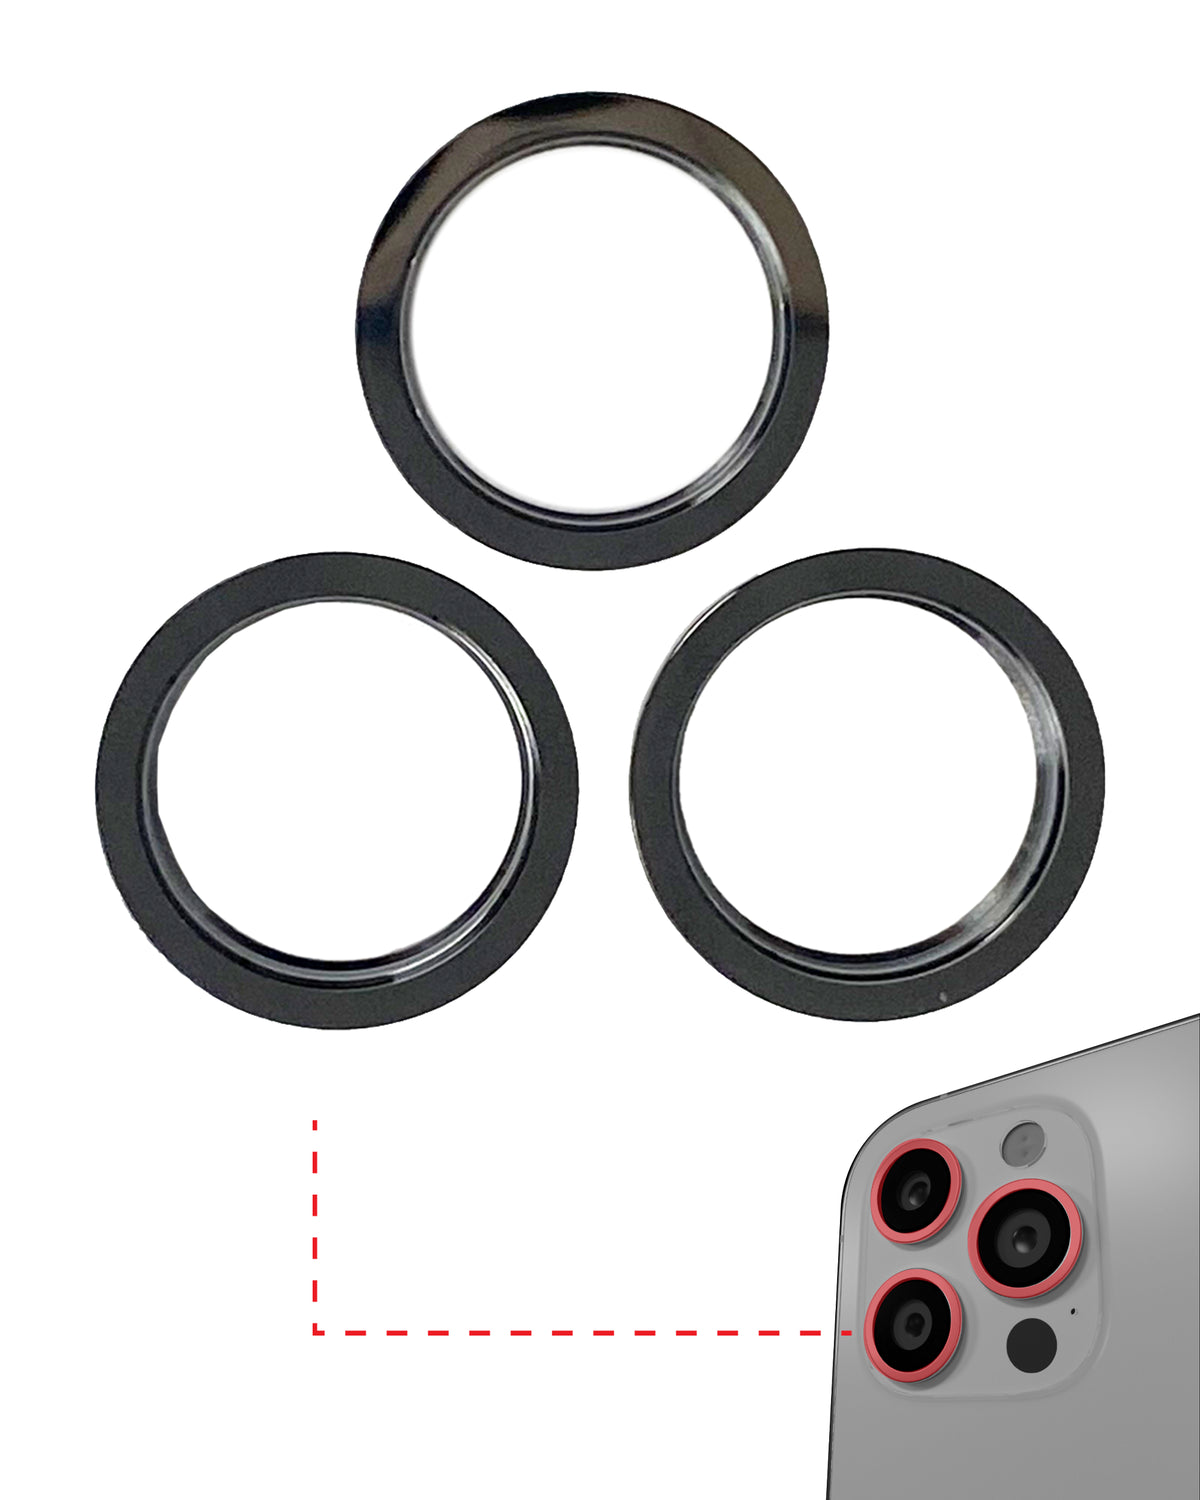 GRAPHITE - BACK CAMERA BEZEL RING ONLY (3 PIECE SET) FOR IPHONE 12 PRO MAX (10 PACK)